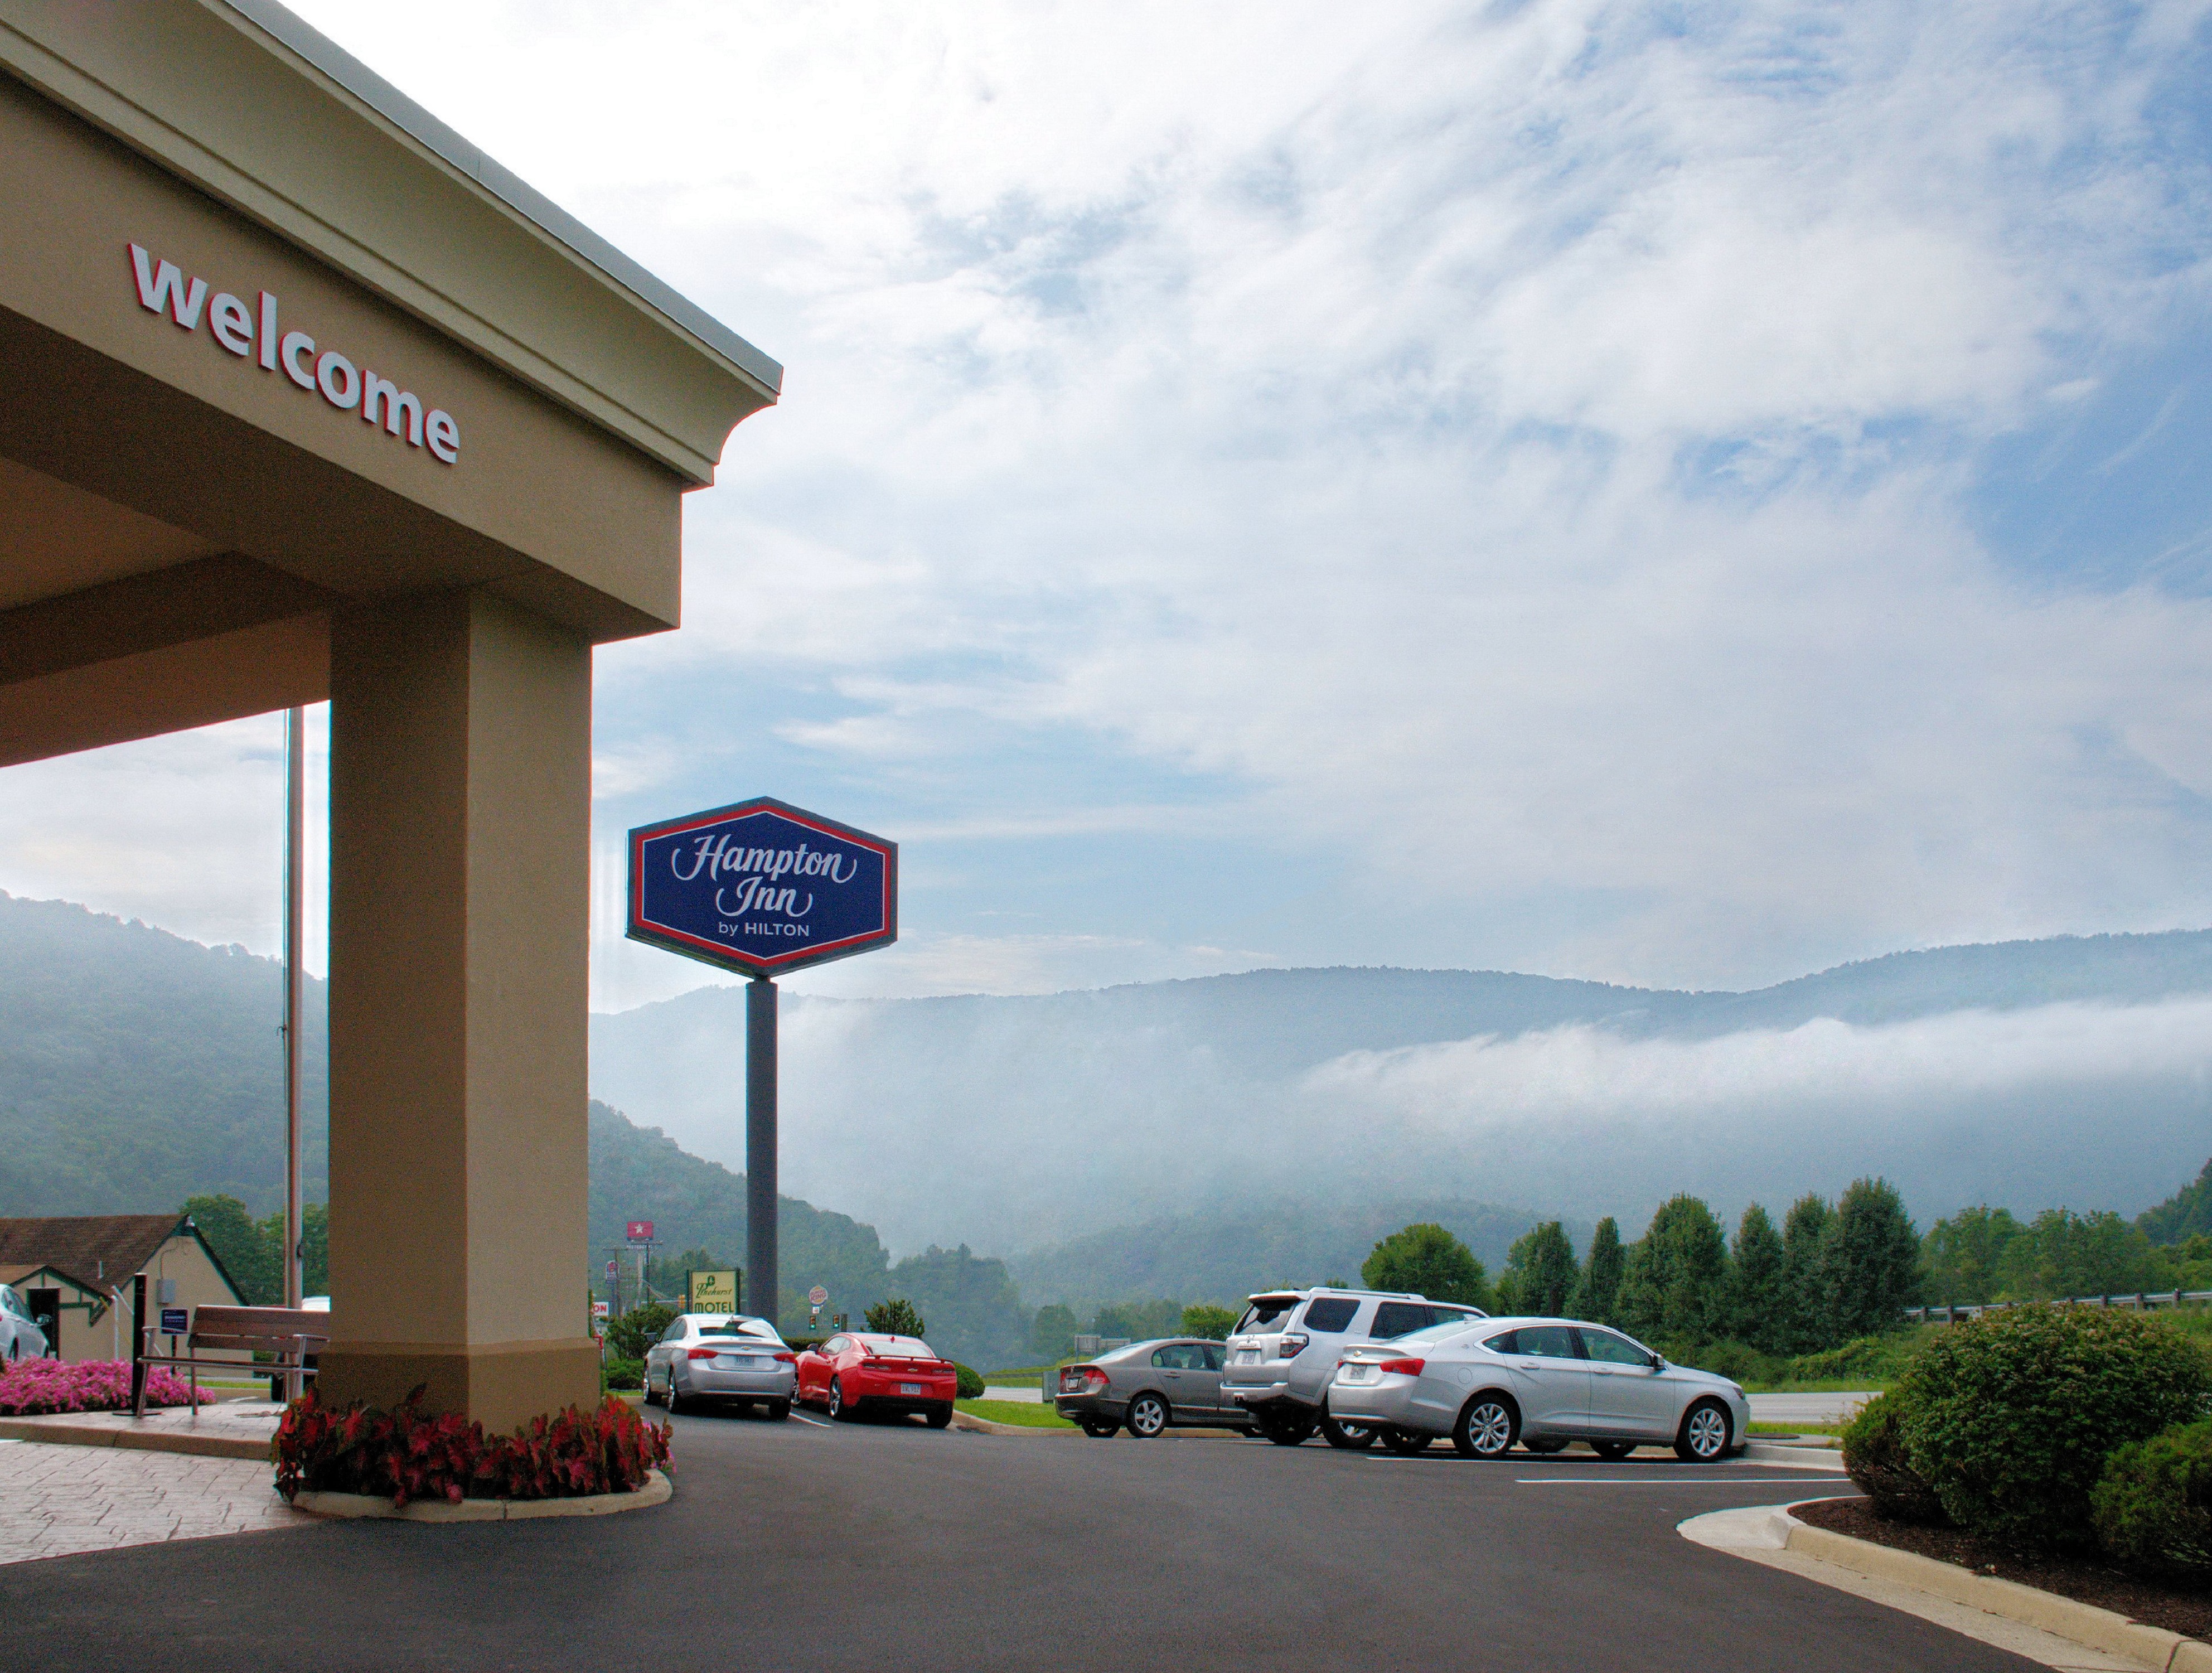 Side View of Hotel Exterior, Parking Lot and Mountain View